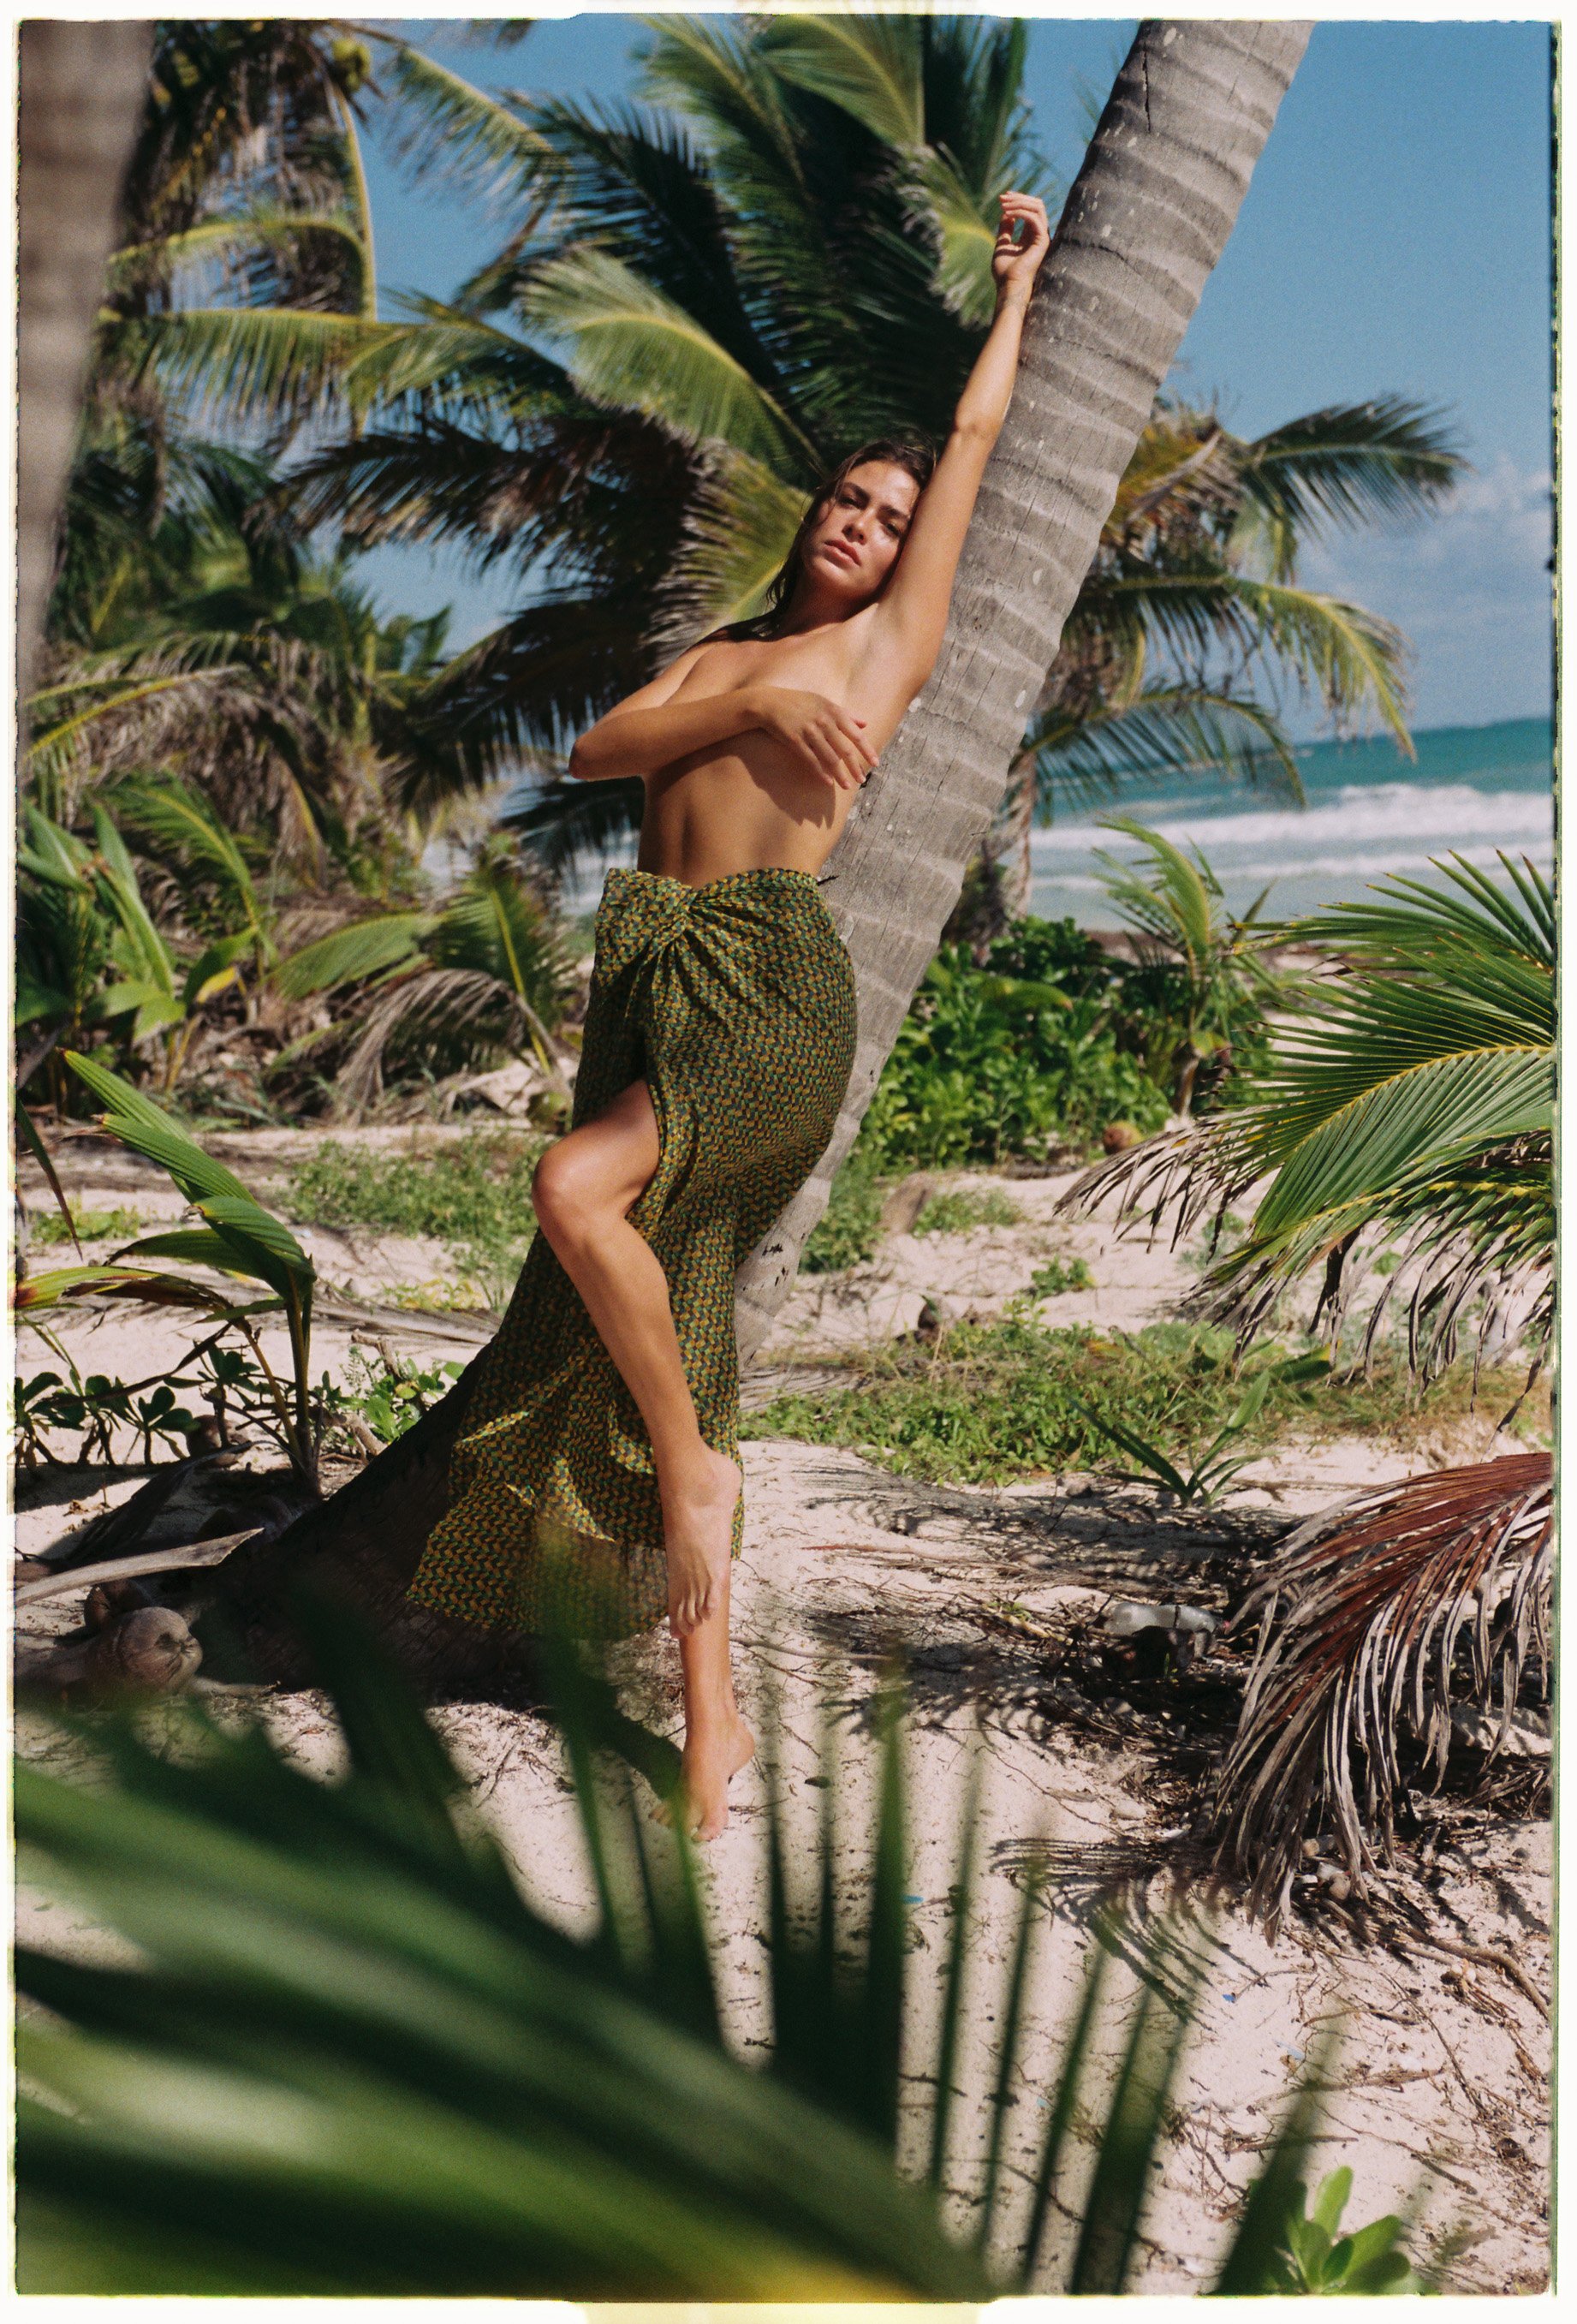  Film photoshoot for Faithfull The Brand captured on untouched beach in Sian Ka’an biosphere reserve in Tulum, Mexico with authentic Mexican cabana. Photographed by Susan Berry on Kodak e100 and Portra 160 35mm film. 